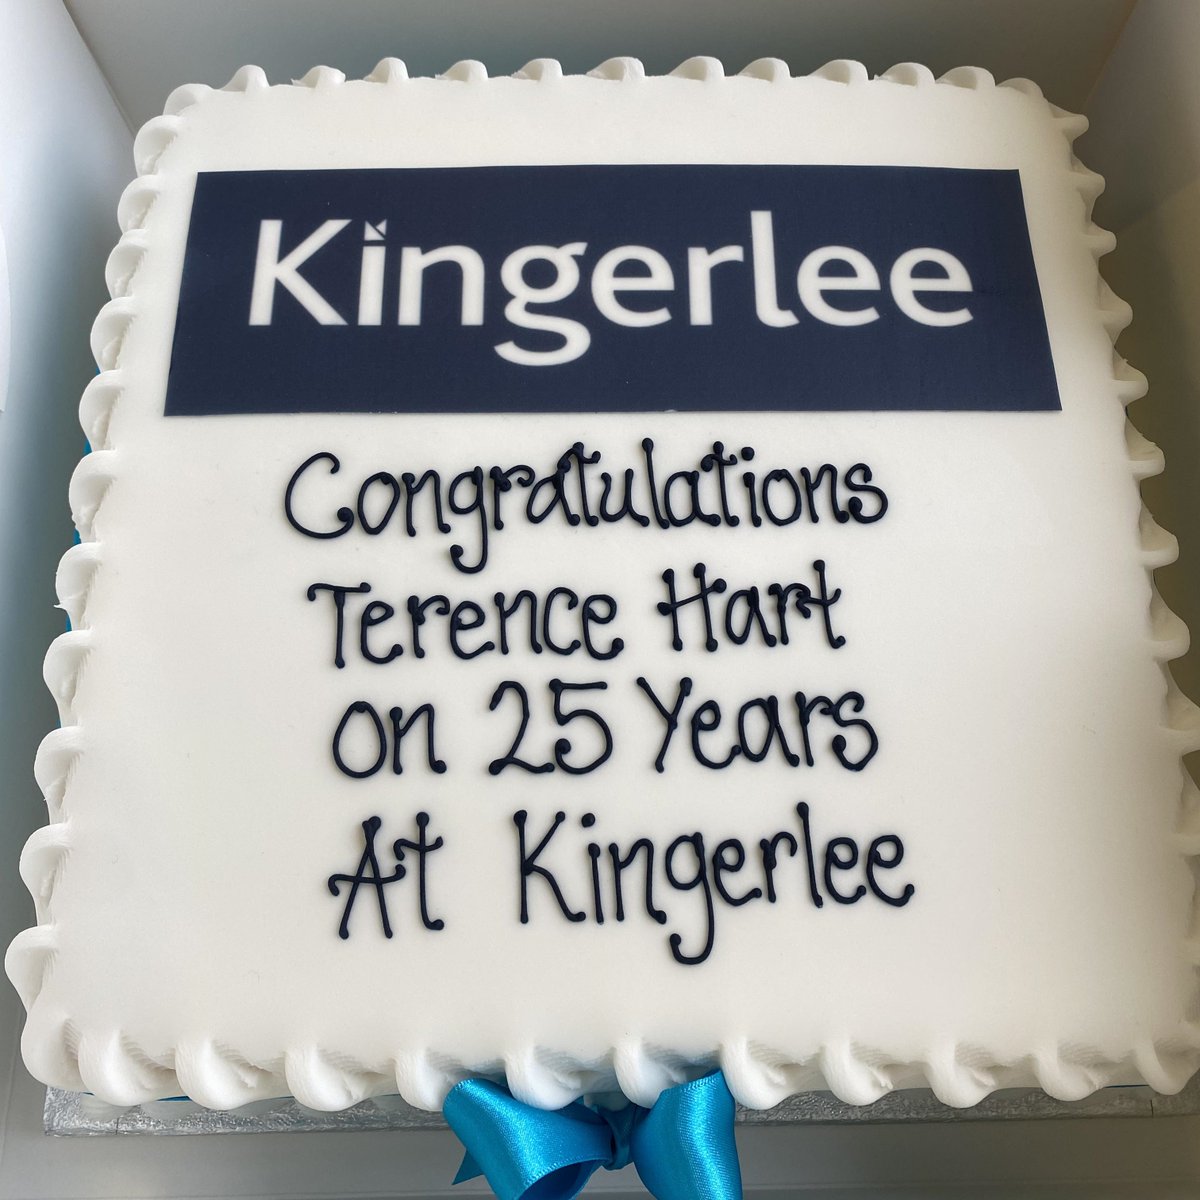 Paul Rolston our Yard Manager, recently celebrated 35 years with Kingerlee and Terry Hart, our Site Manager who reached 25 years of service. Congratulations to you both on achieving these amazing milestones, we commend you on your commitment to the Kingerlee team!🎉🥂